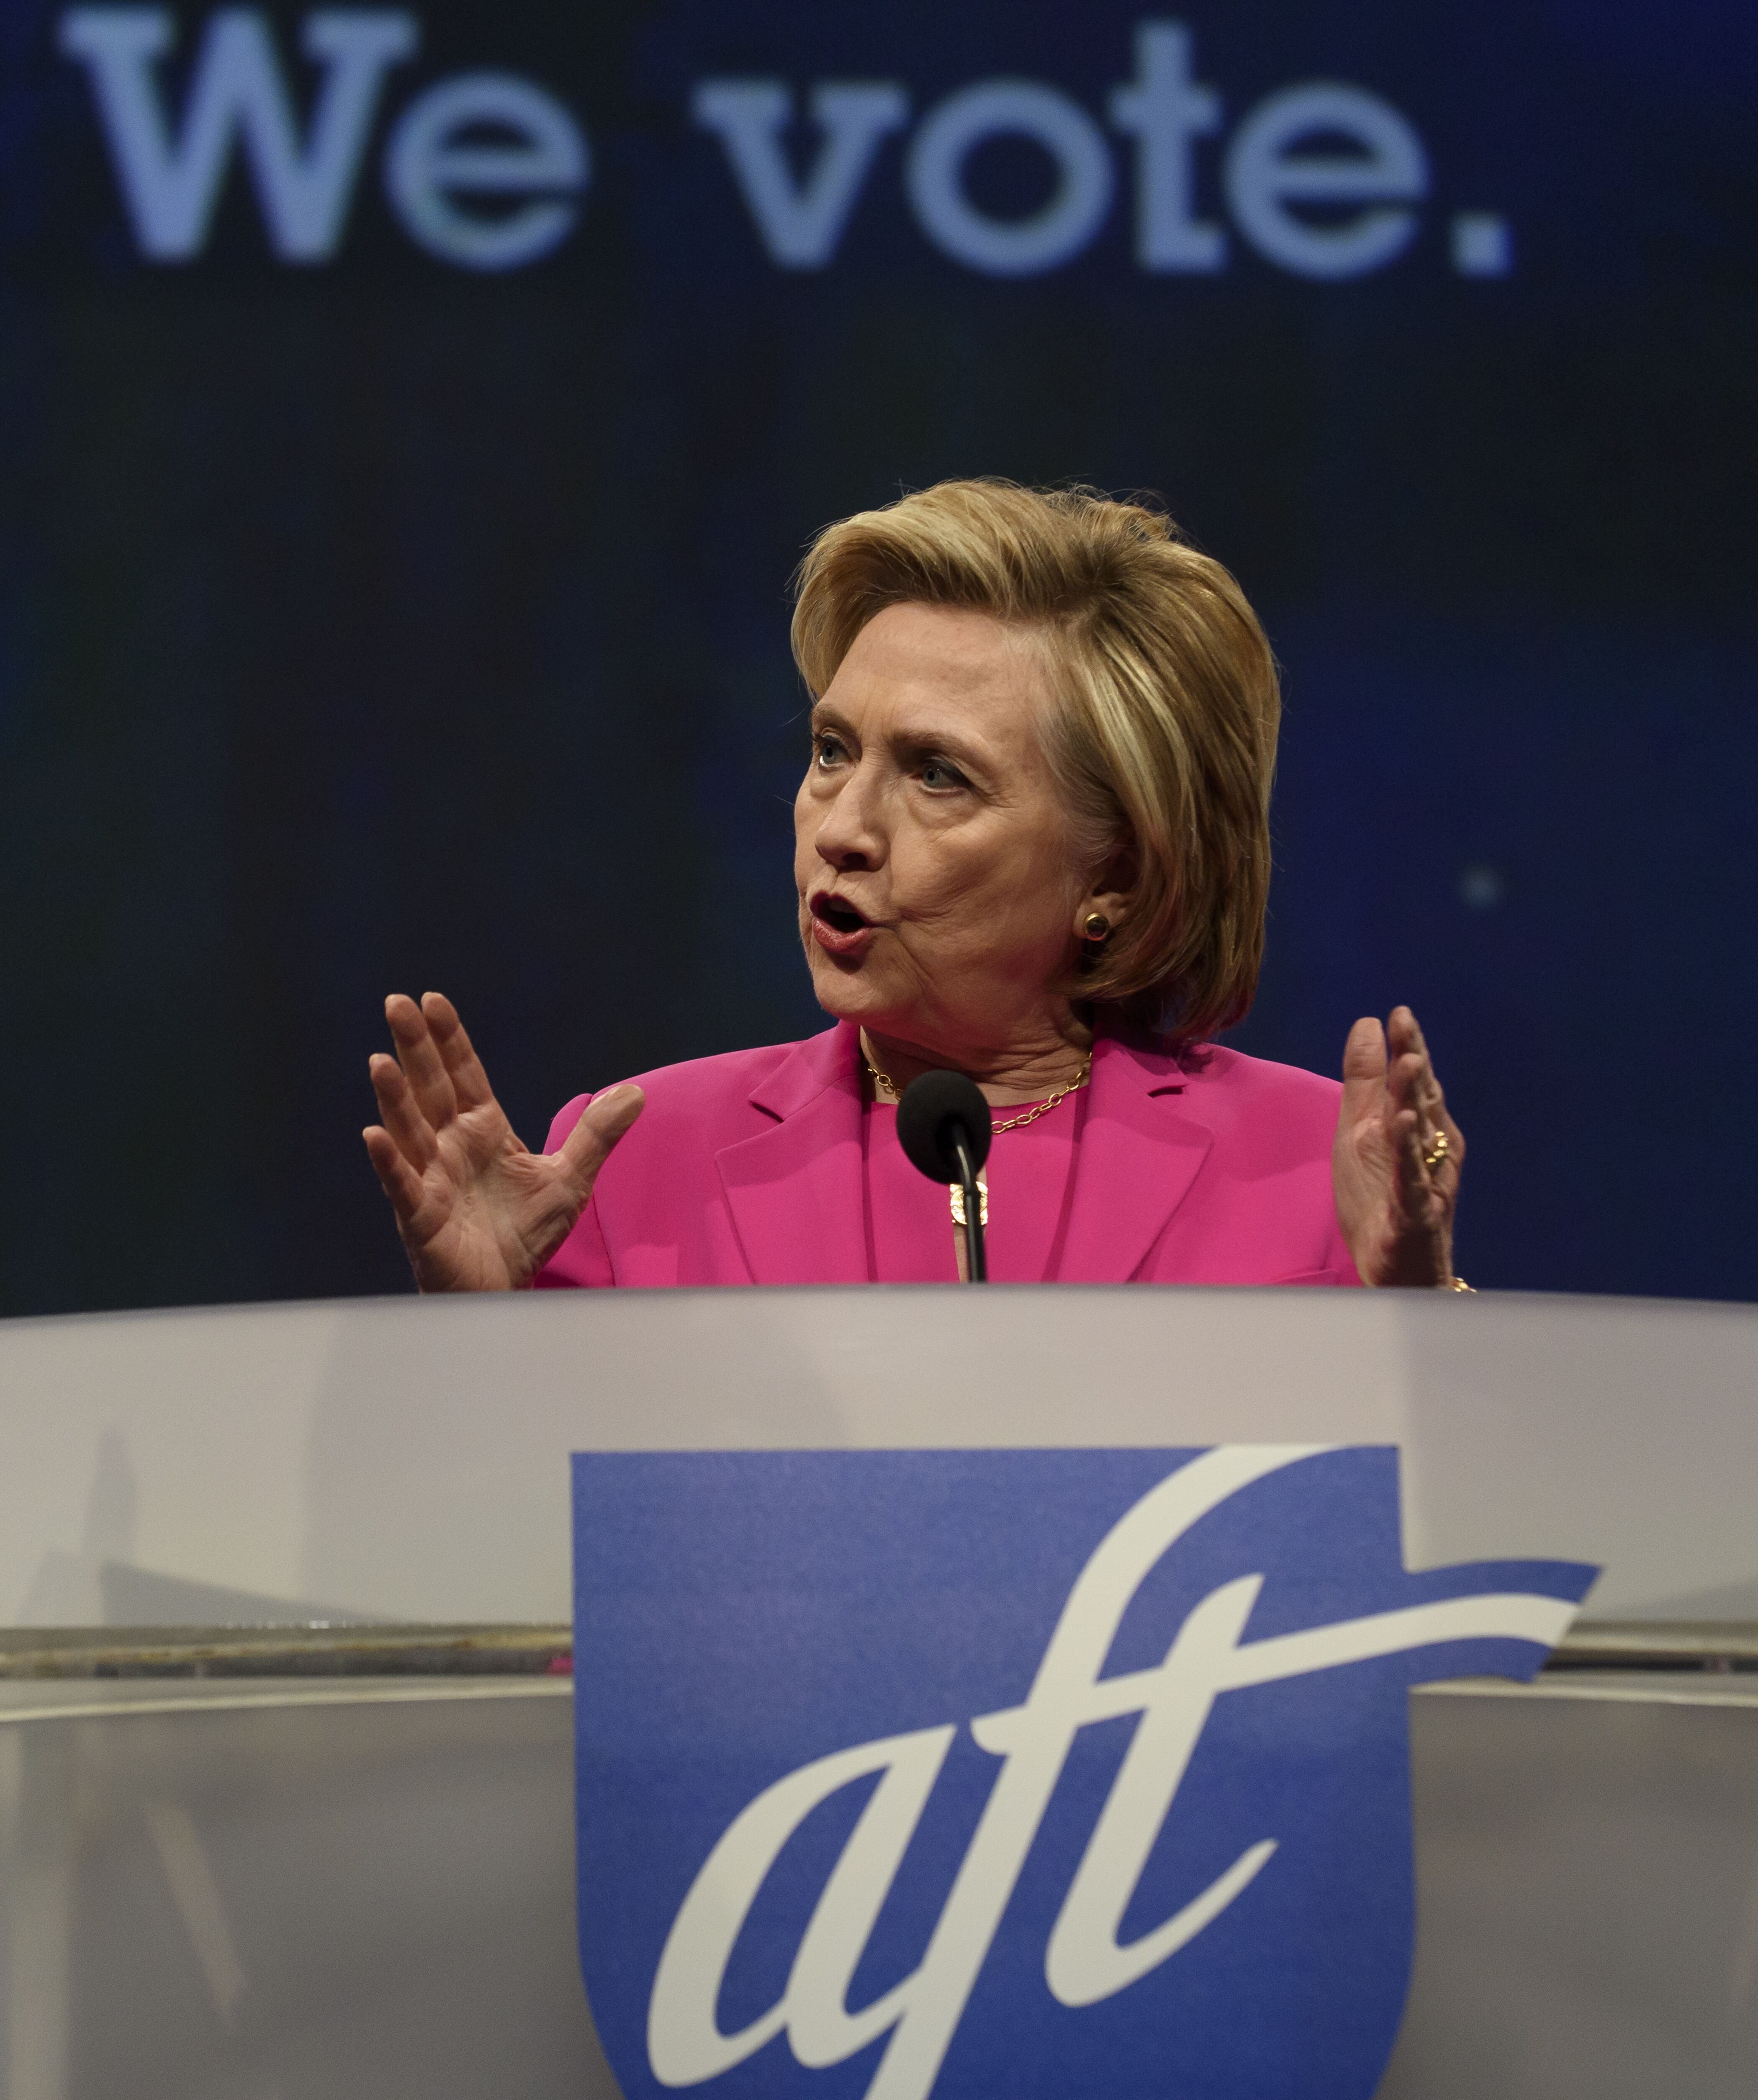 Hillary Clintonat the annual convention of the American Federation of Teachers in Pittsburgh in 2018 | Source: Getty Images